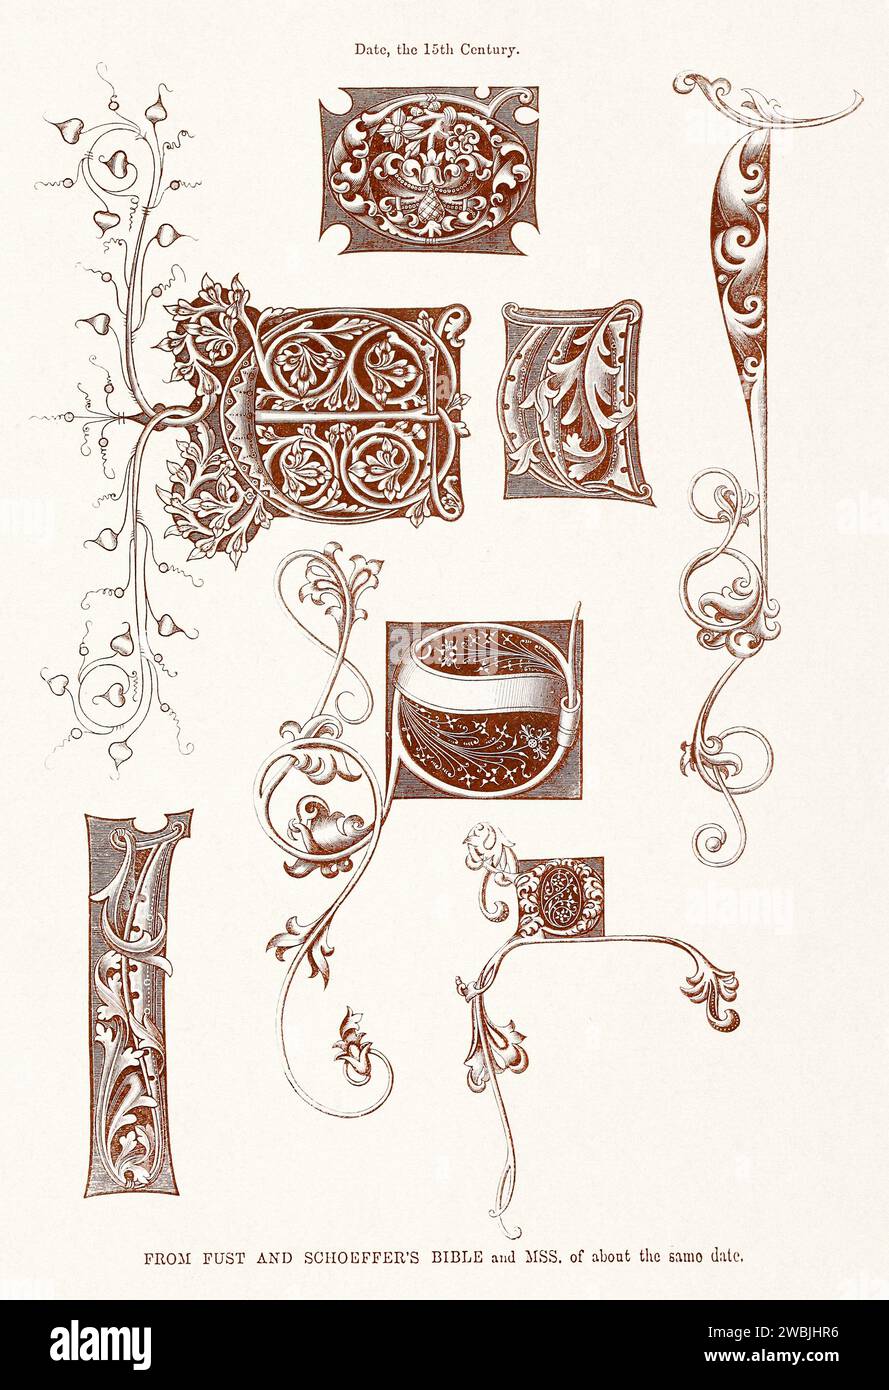 Medieval Alphabet initials. 19th-century book illustration showcasing ancient initials and decorative elements from medieval alphabets. Stock Photo